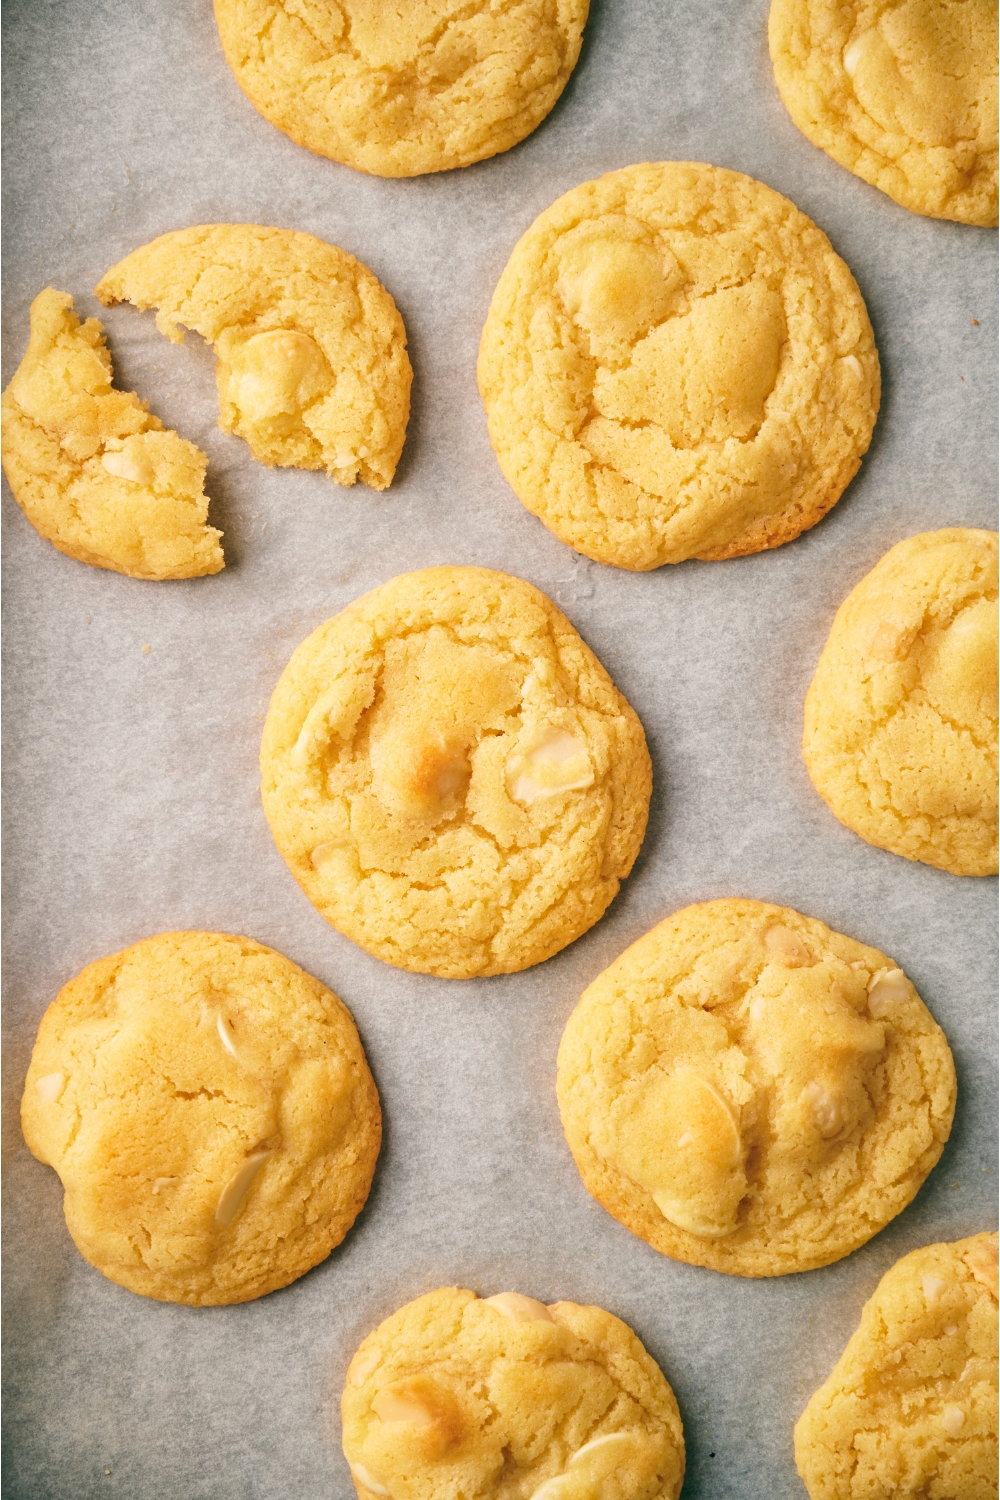 White chocolate macadamia nut cookies spread evenly on a baking sheet lined with parchment paper and one cookie is broken in half.